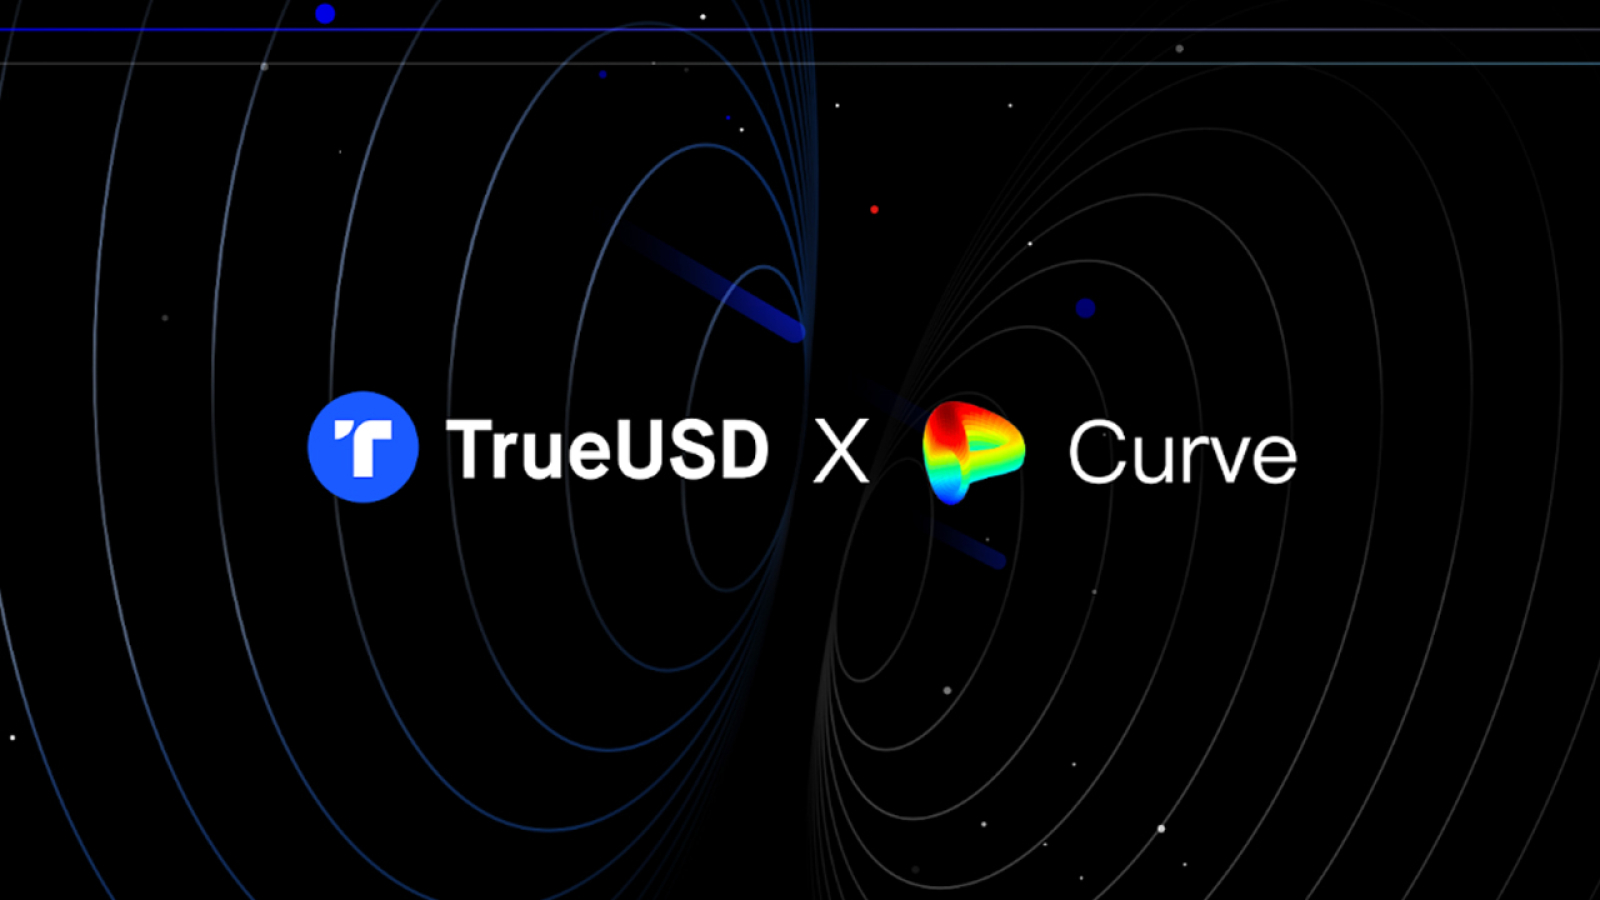 TUSD-am3CRV Pool Launches on Curve (Polygon) with the Gauge Feature